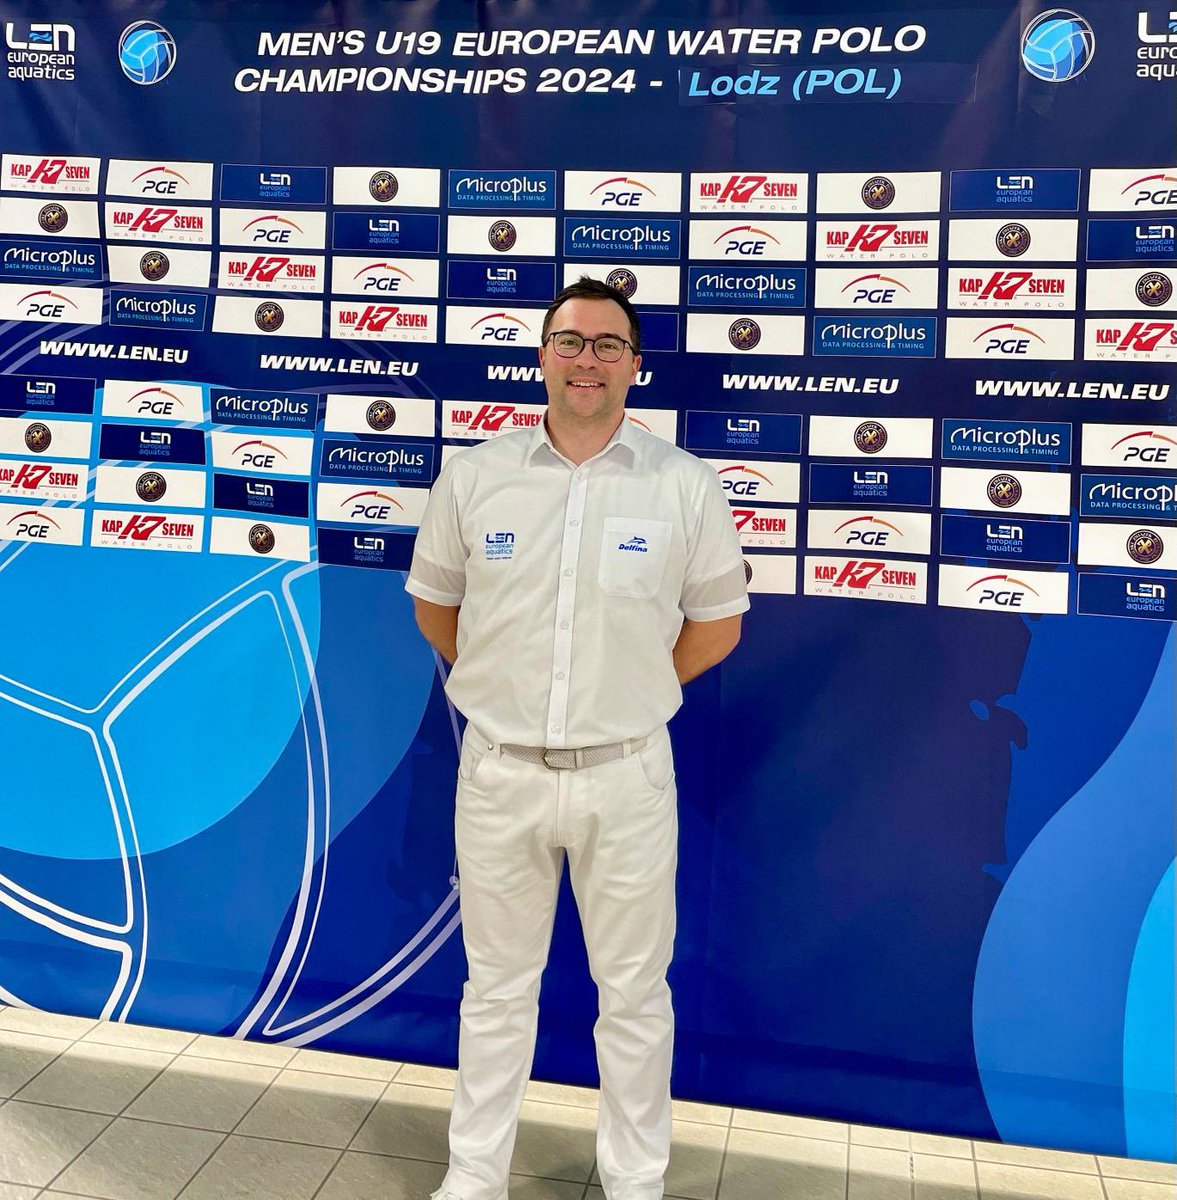 Great to see Great Britain referee Max Gerasimov in Poland over the weekend working at the Men's U19 European Water Polo Championships Group C qualifiers.